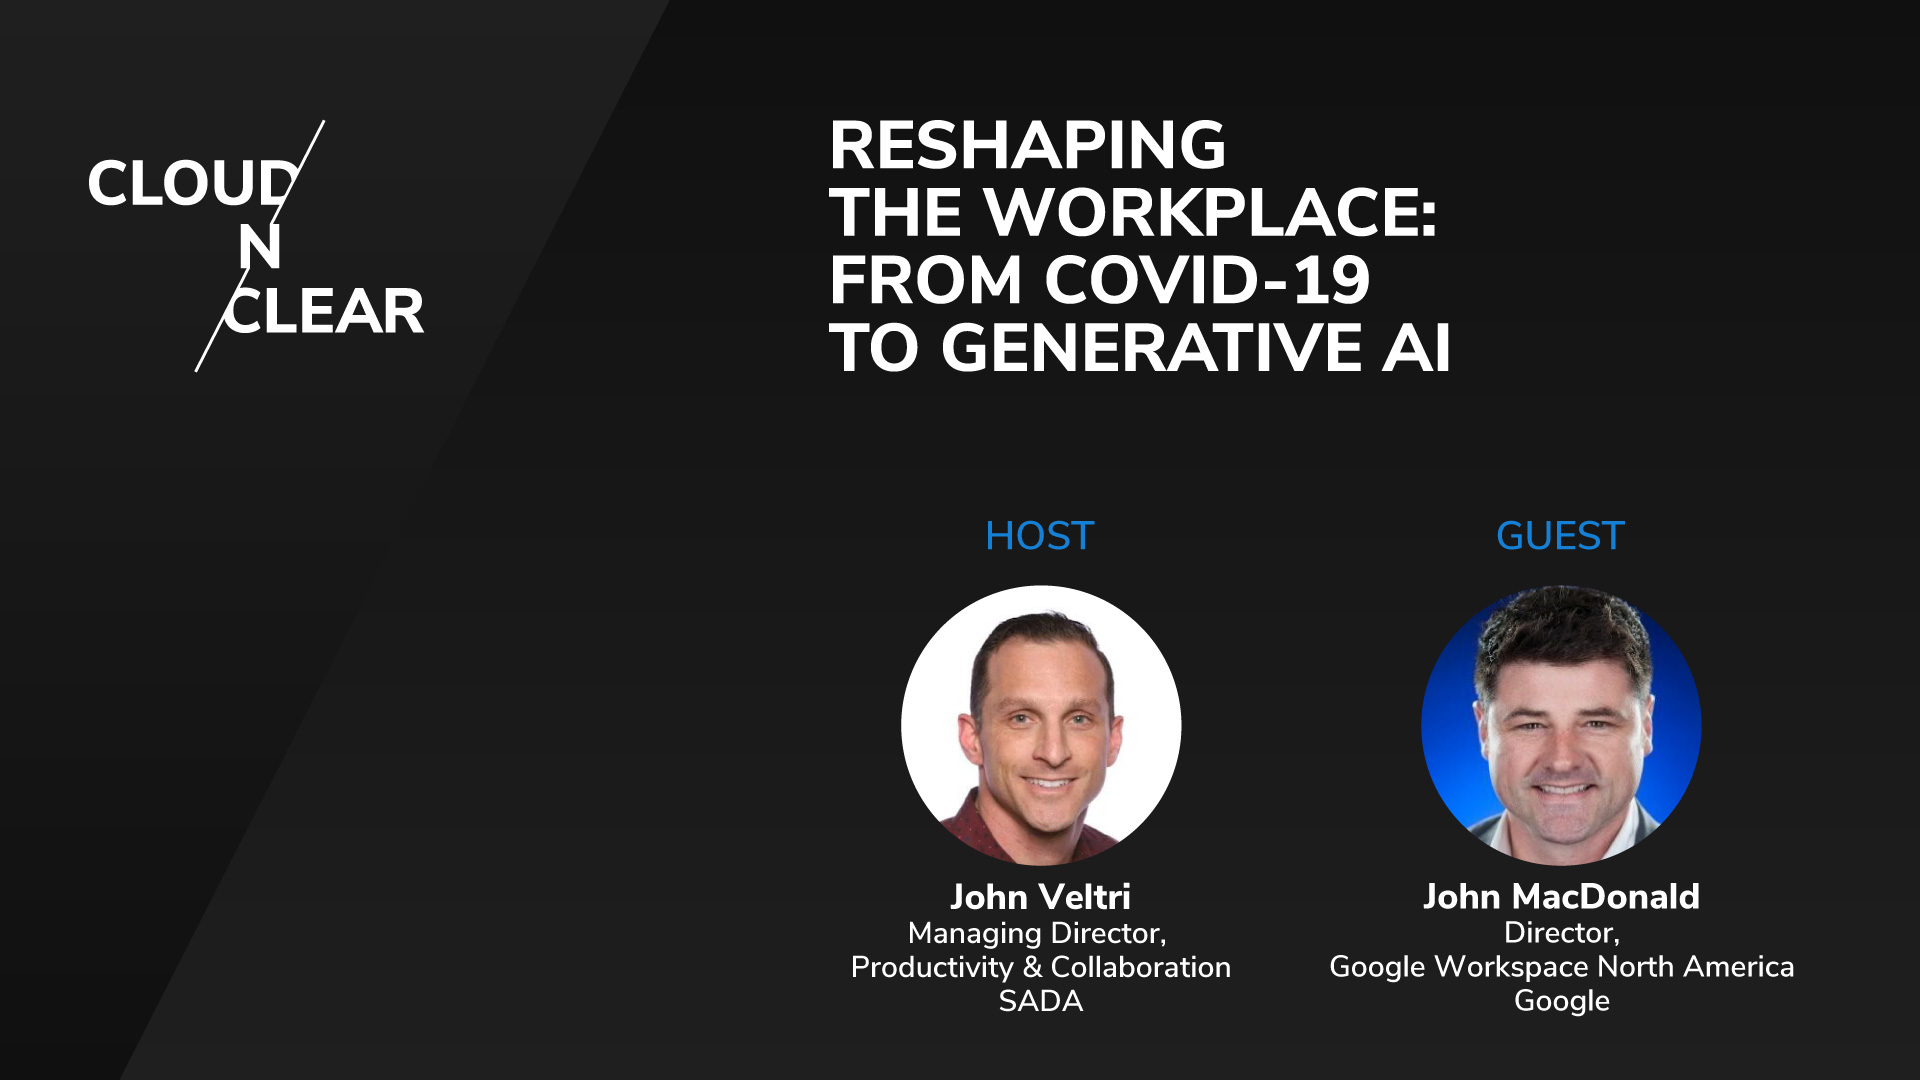 Reshaping the Workplace: From COVID-19 to Generative AI